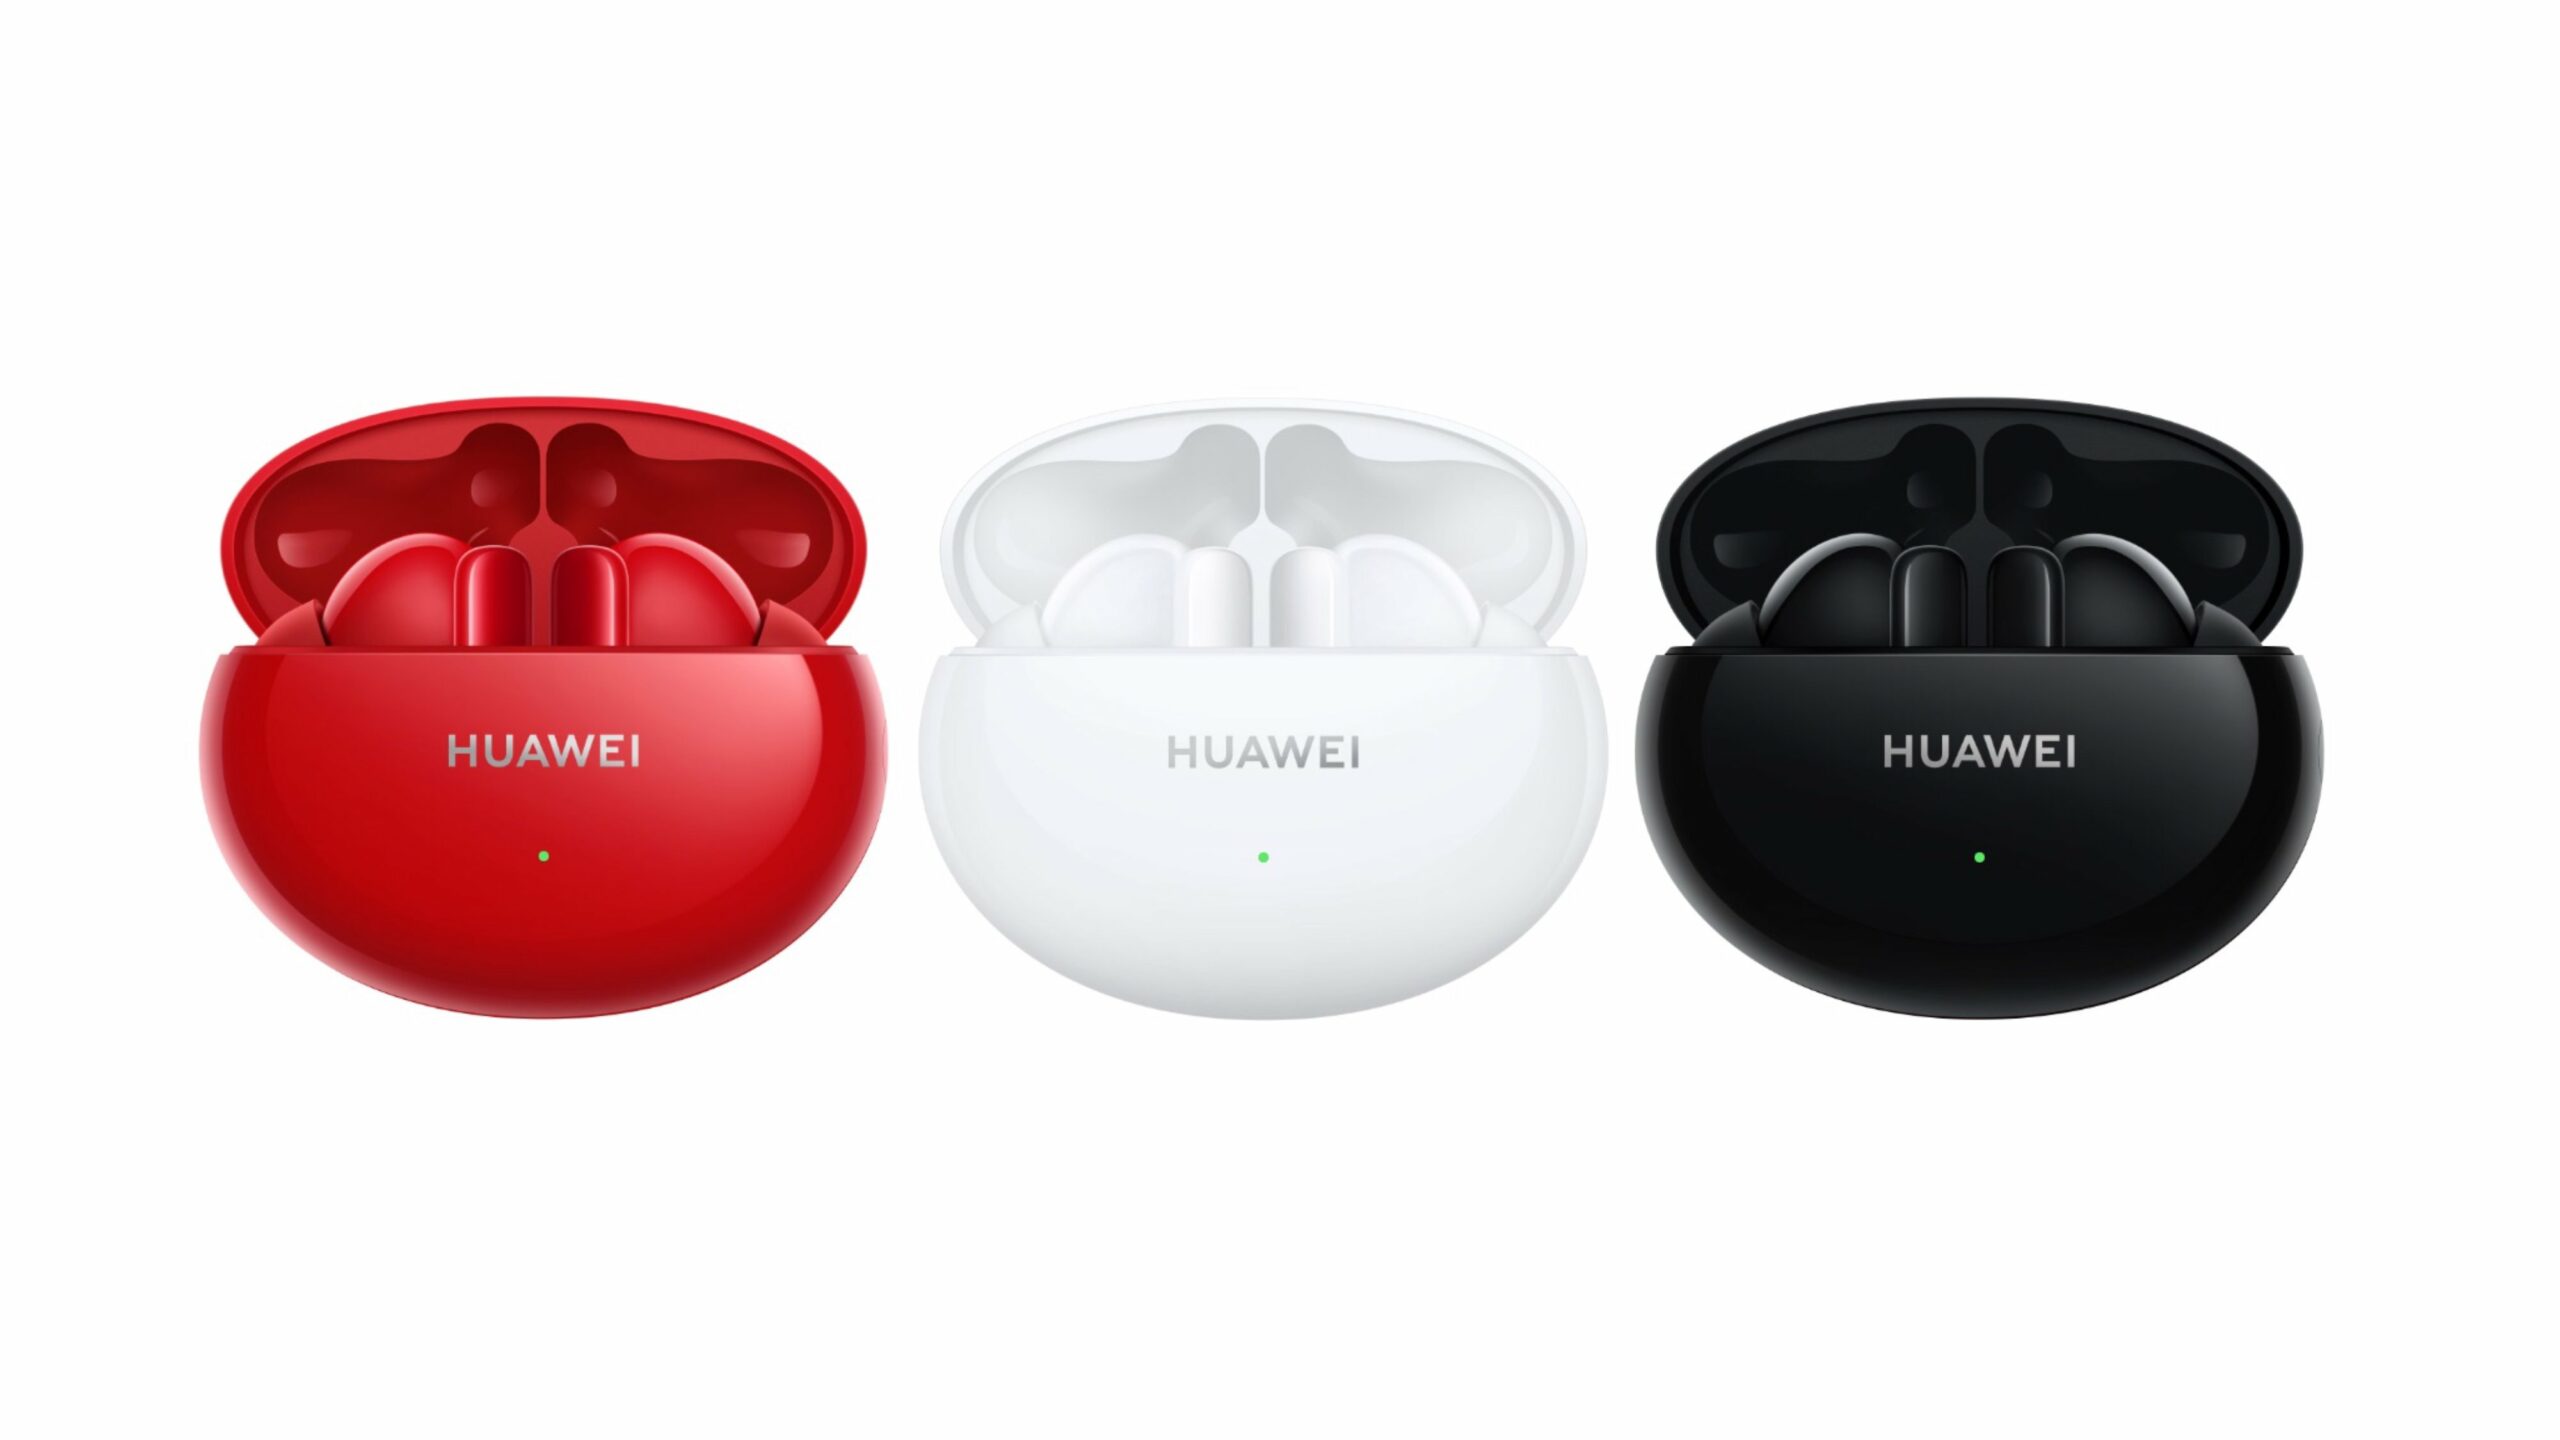 HUAWEI FreeBuds 4i Honey Red Ceramic White Carbon Crystal Black Featured